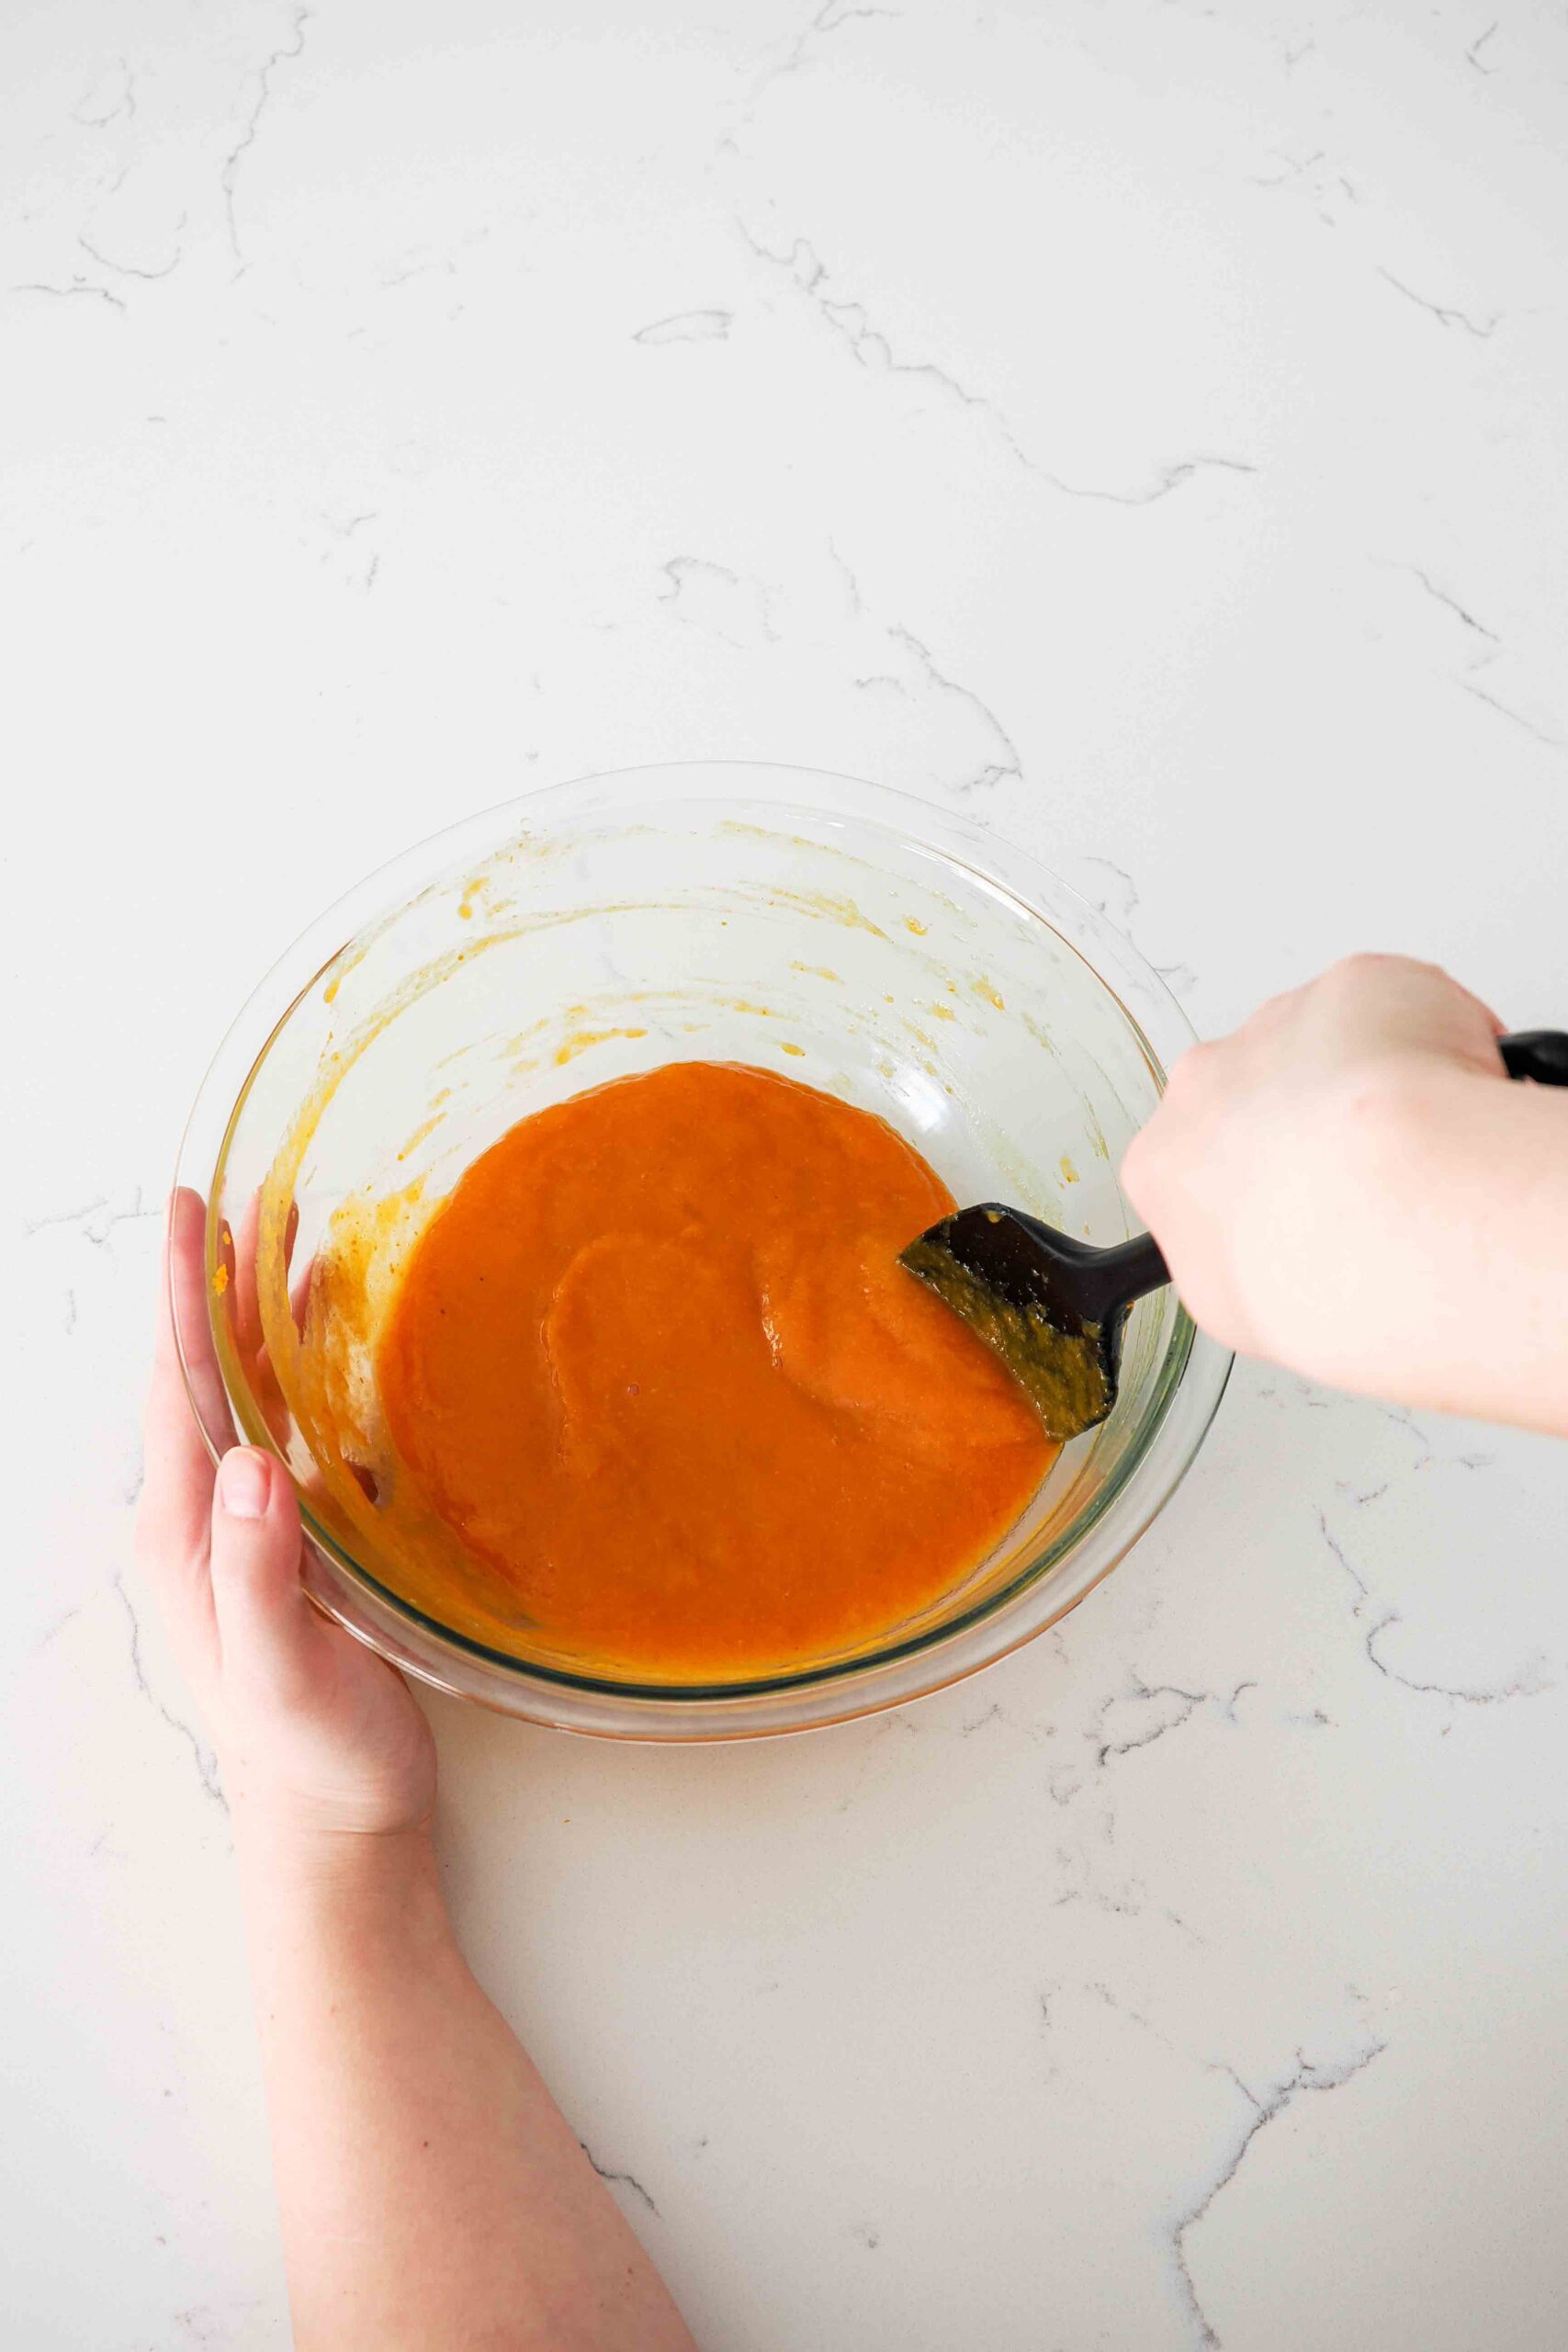 A hand uses a spatula to stir together a wet, pumpkin-colored batter.